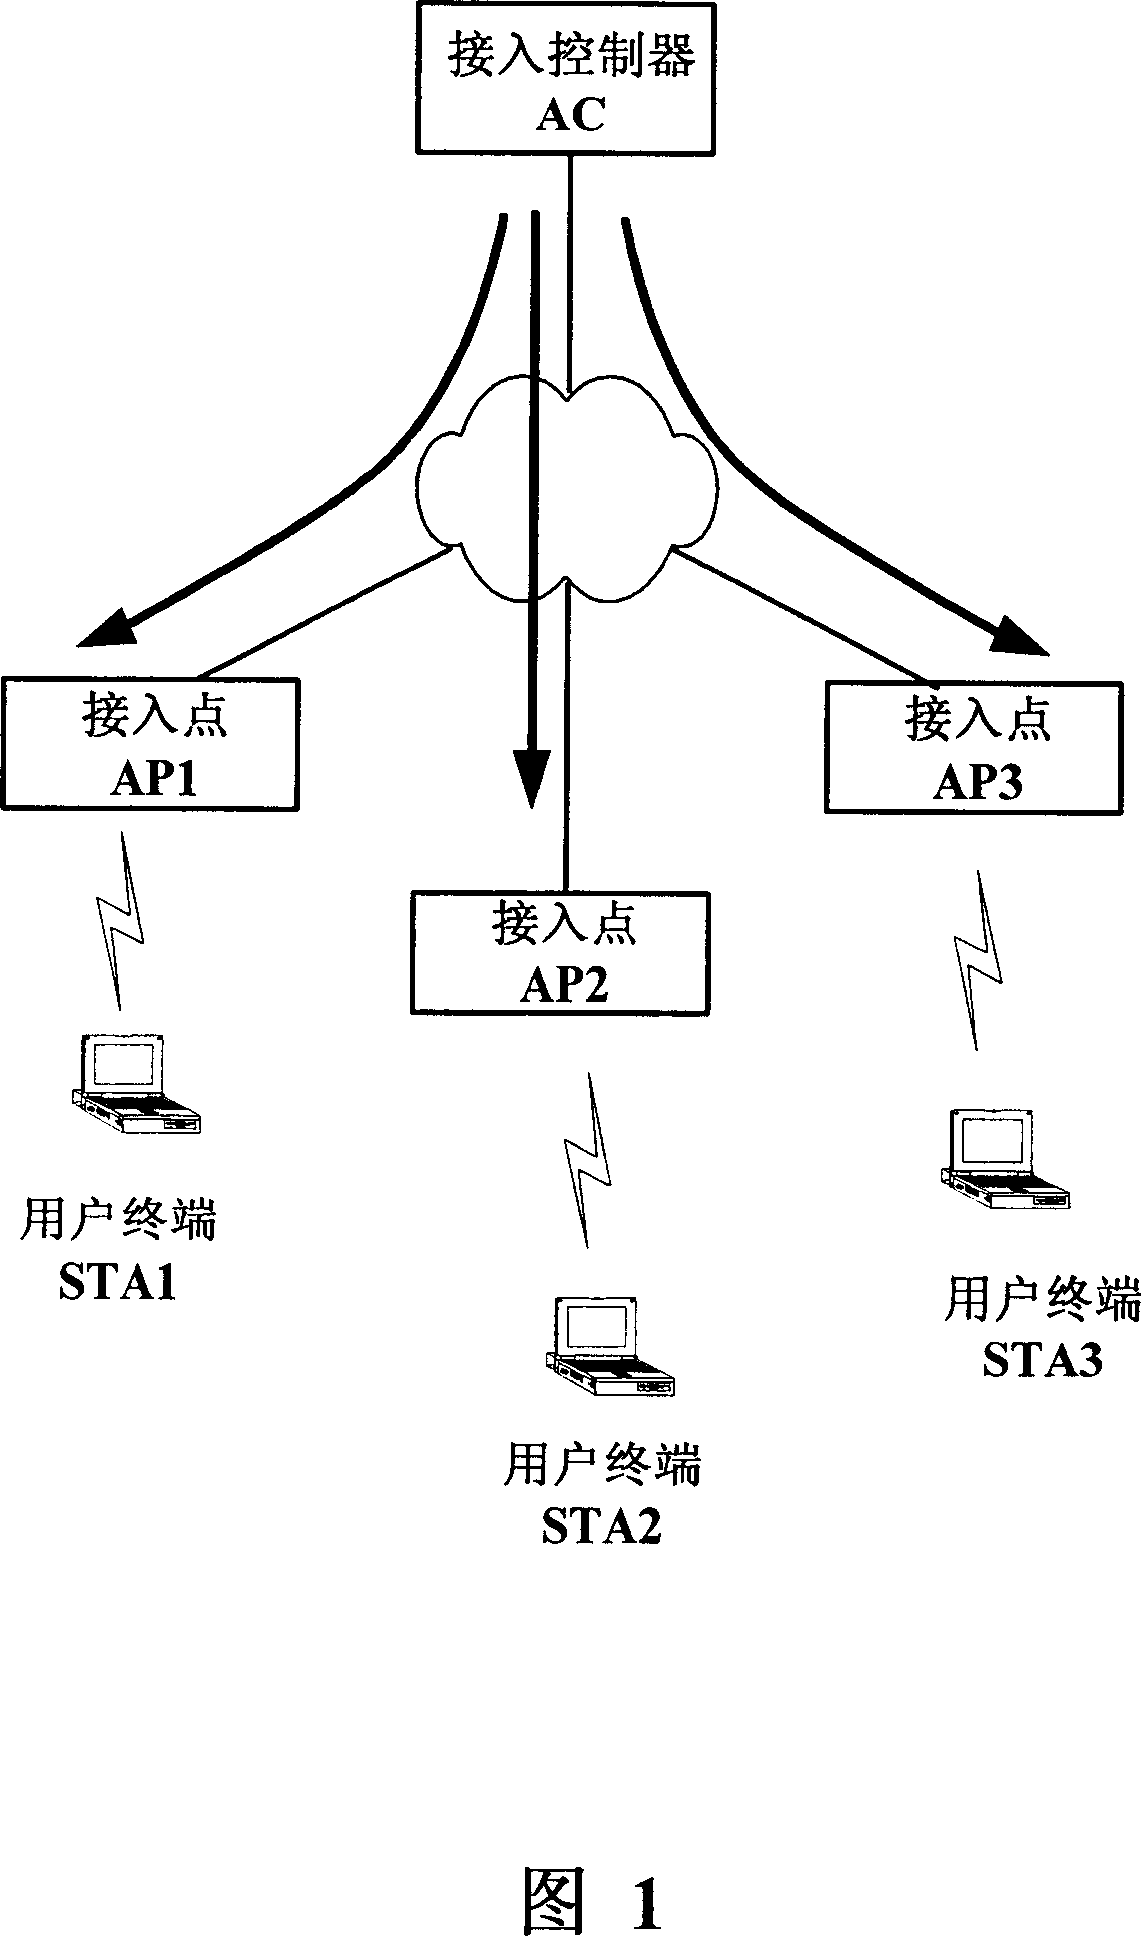 A broadcasting method and access controller for wireless LAN address resolution protocol